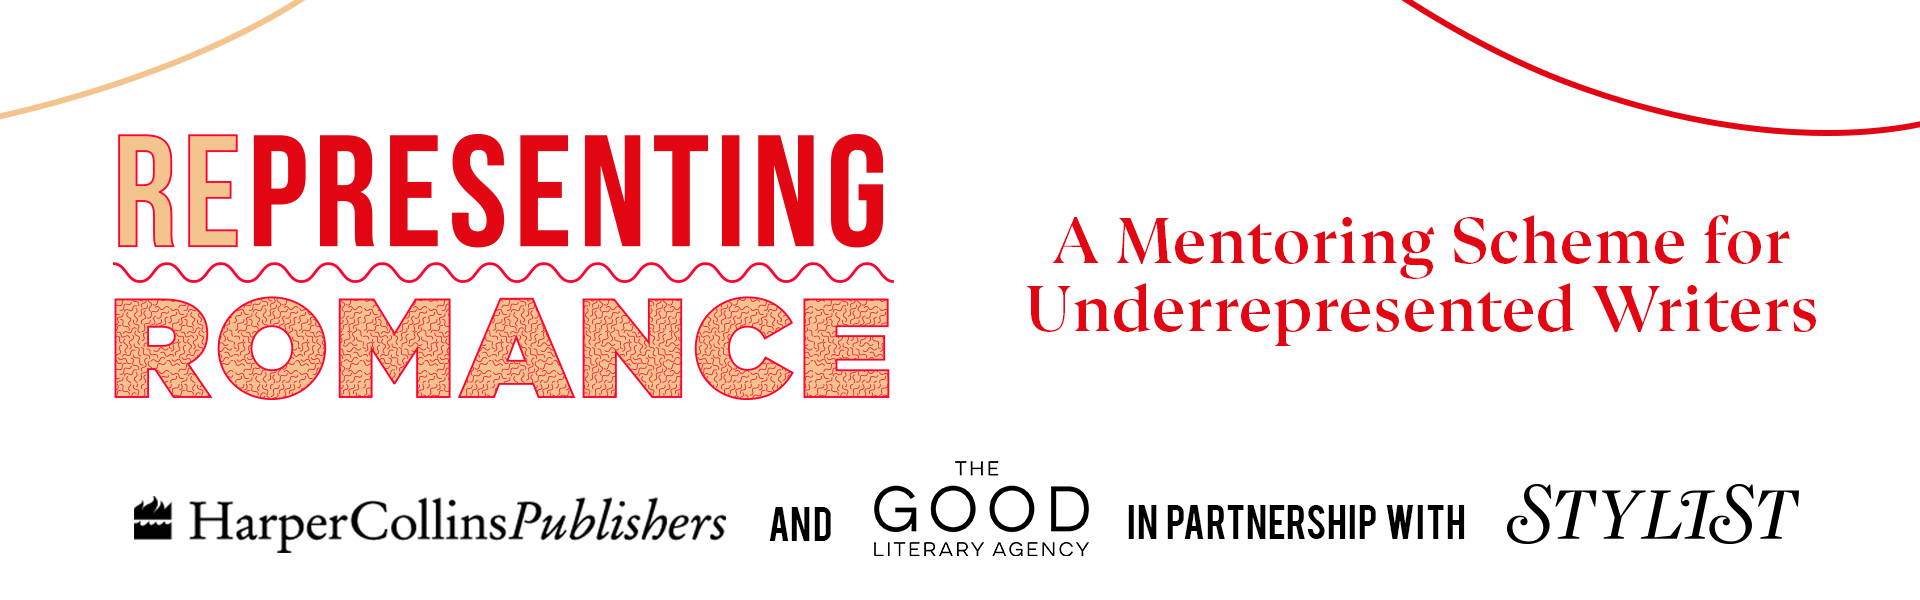 (Re)Presenting Romance: A mentoring scheme for Underrepresented Writers. HarperCollins and The Good Literary Agency in partnership with Stylist